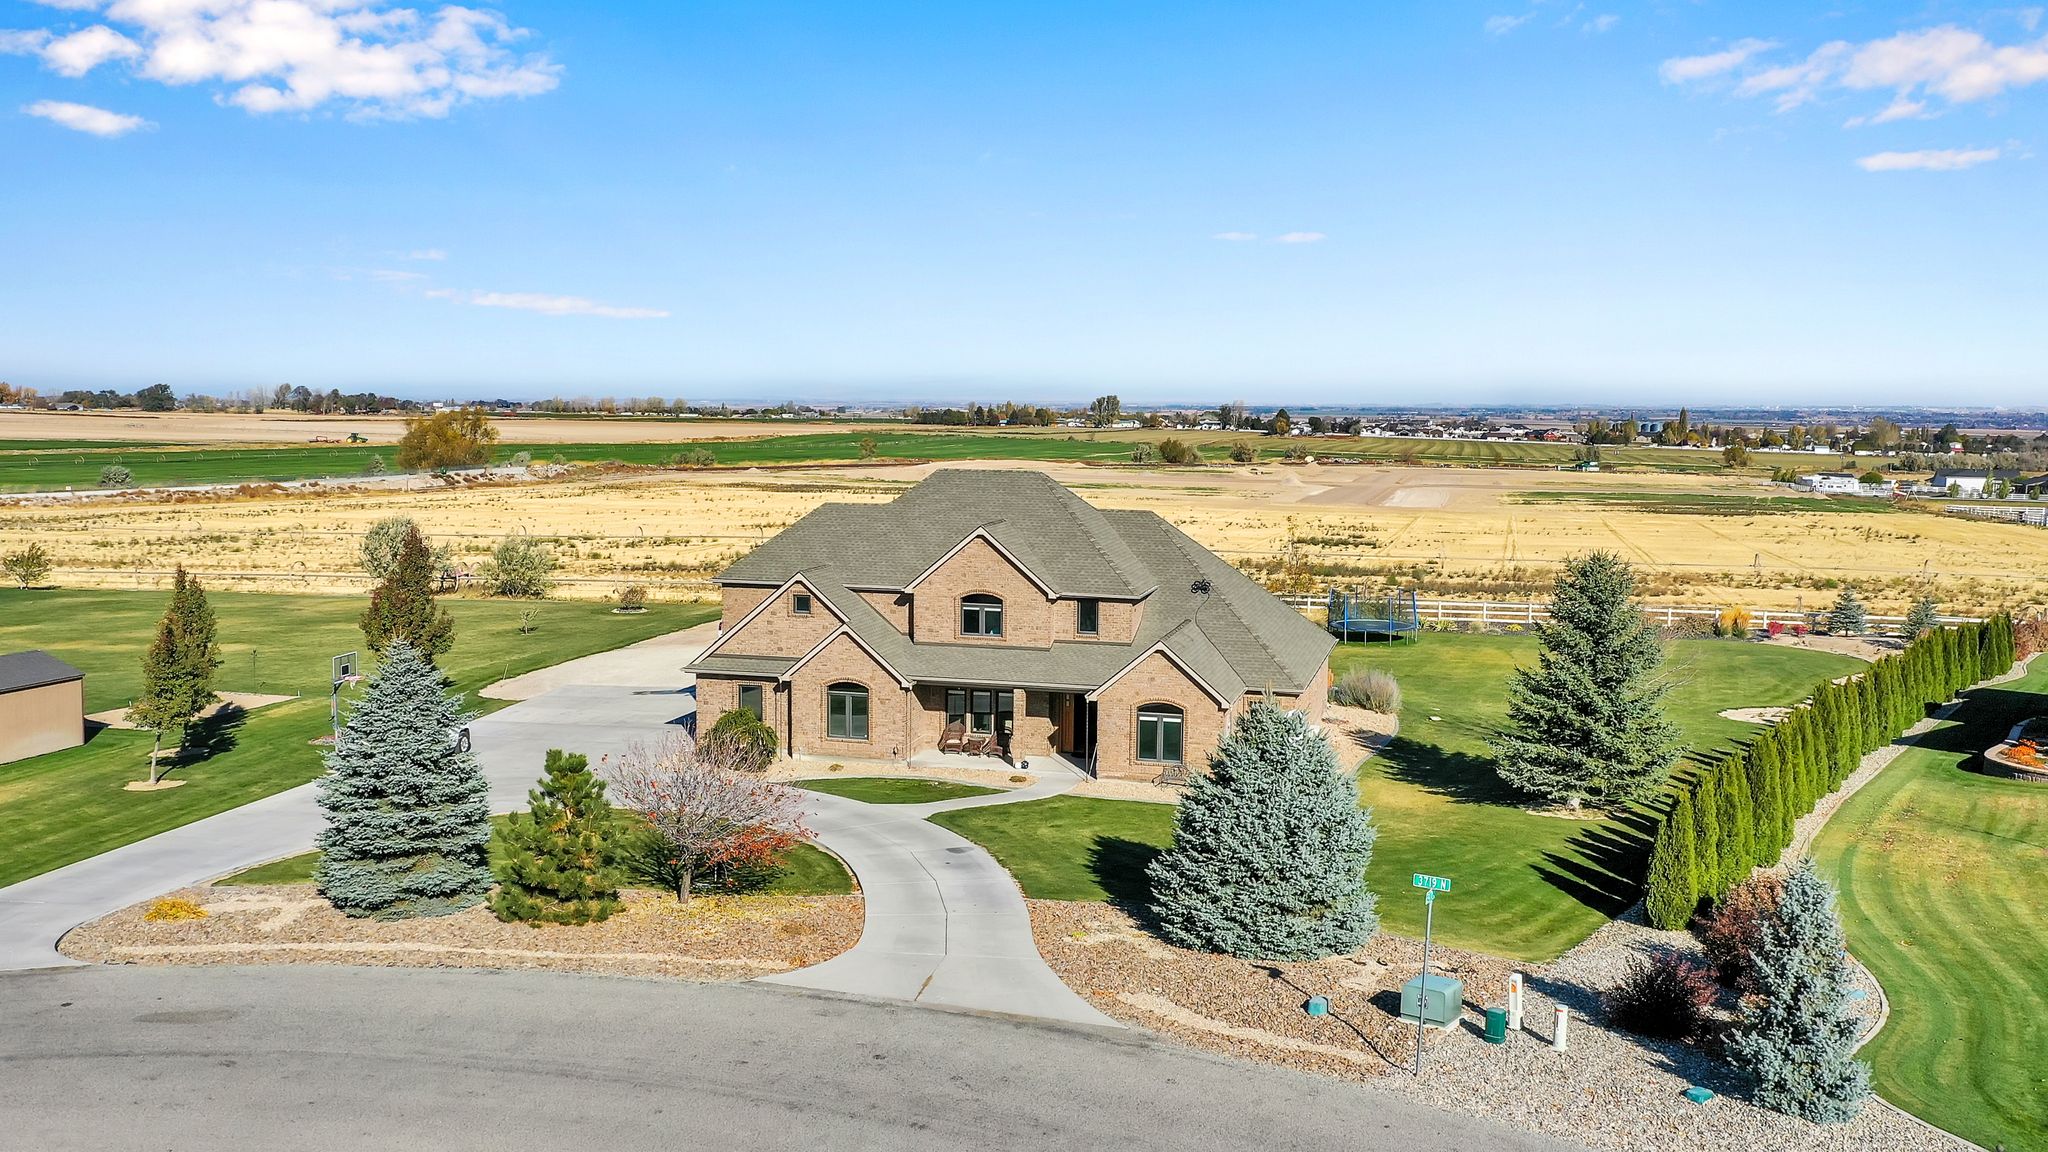 Aerial view of a luxury property for sale in Twin Falls, ID.